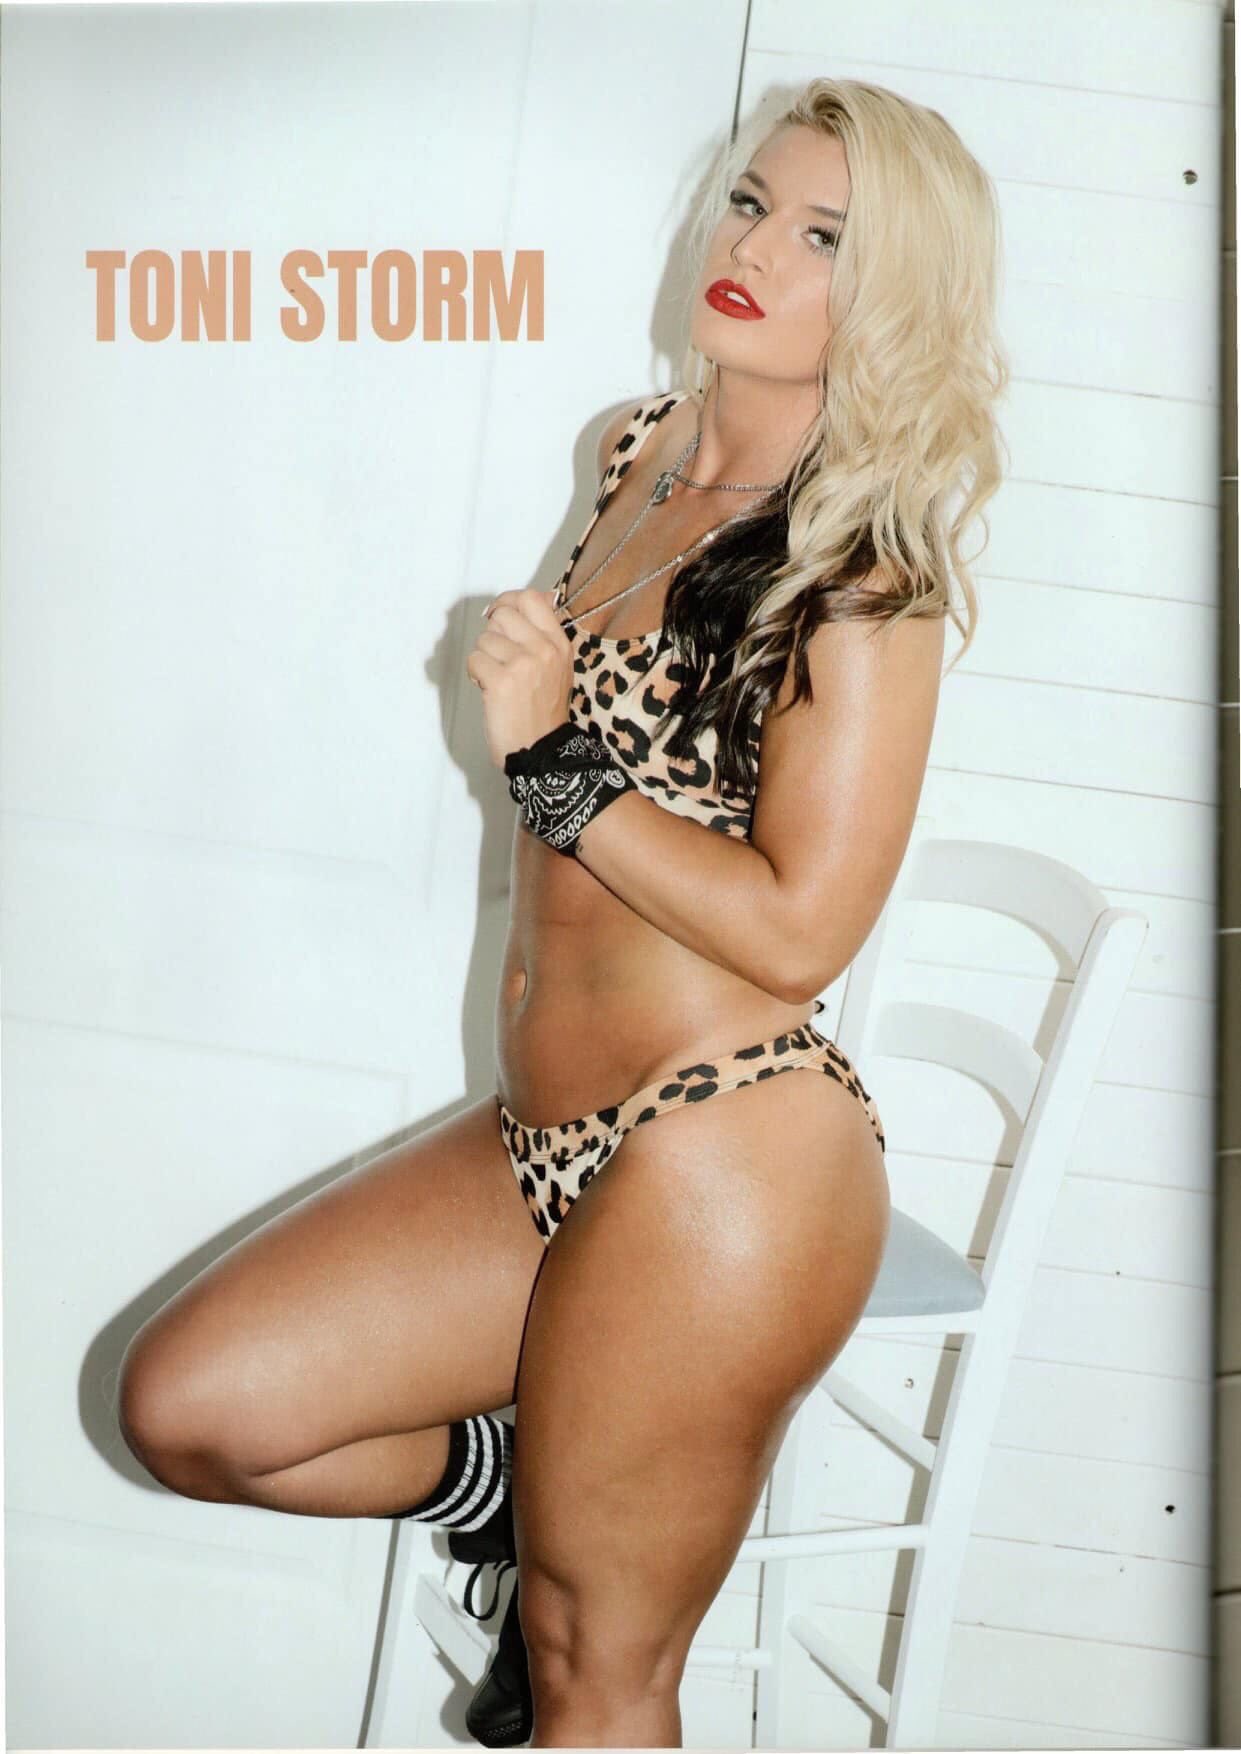 All You Need to Know About WWE NXT Superstar Toni Storm | In Pics